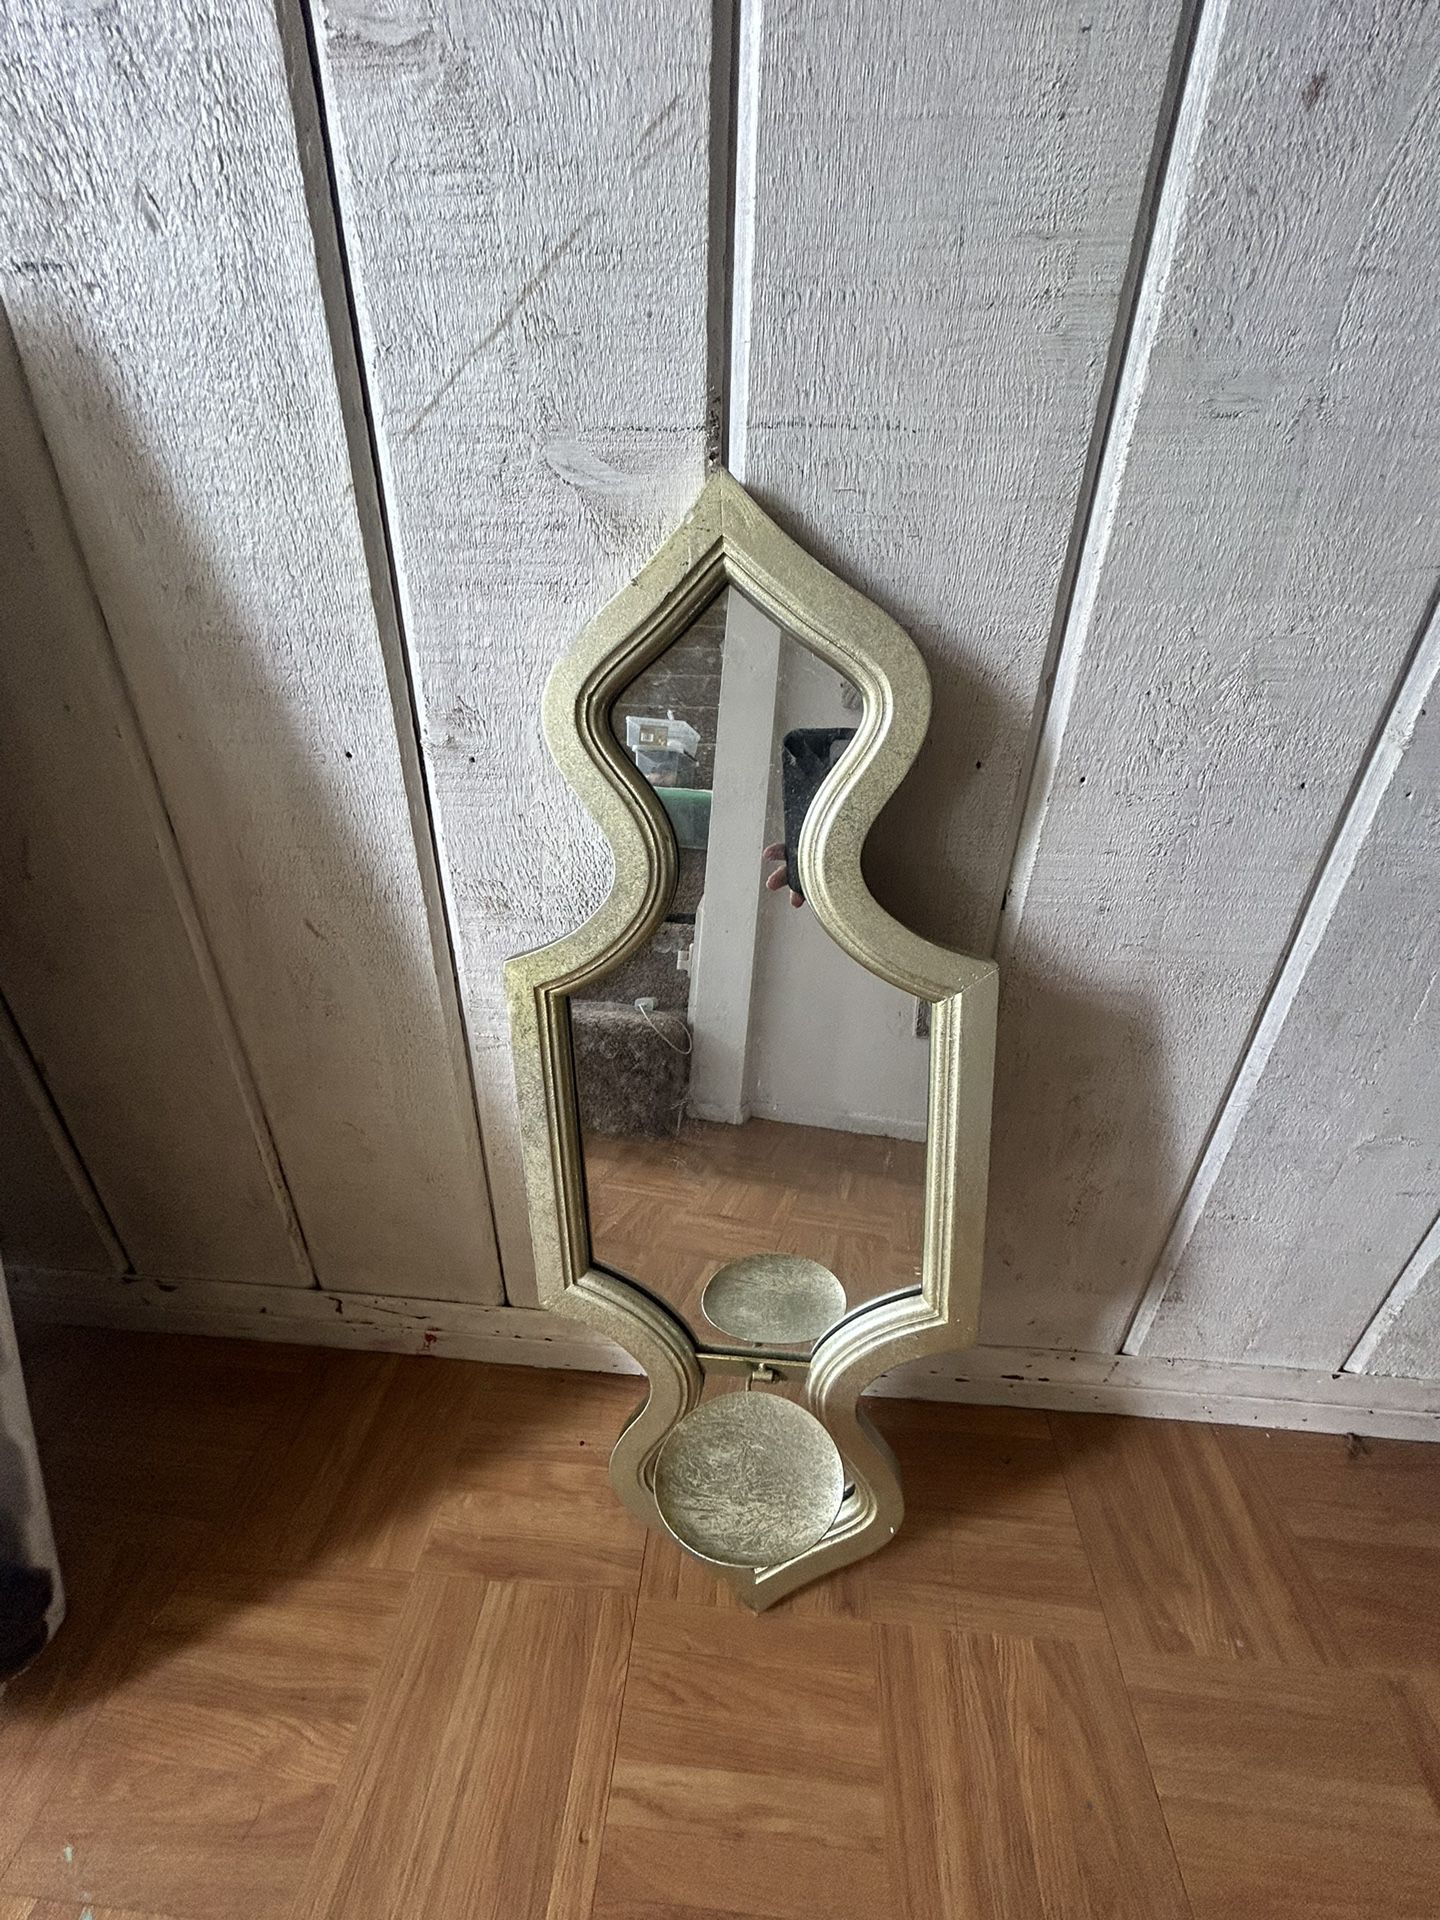 Decorative Mirror With Candle Holder